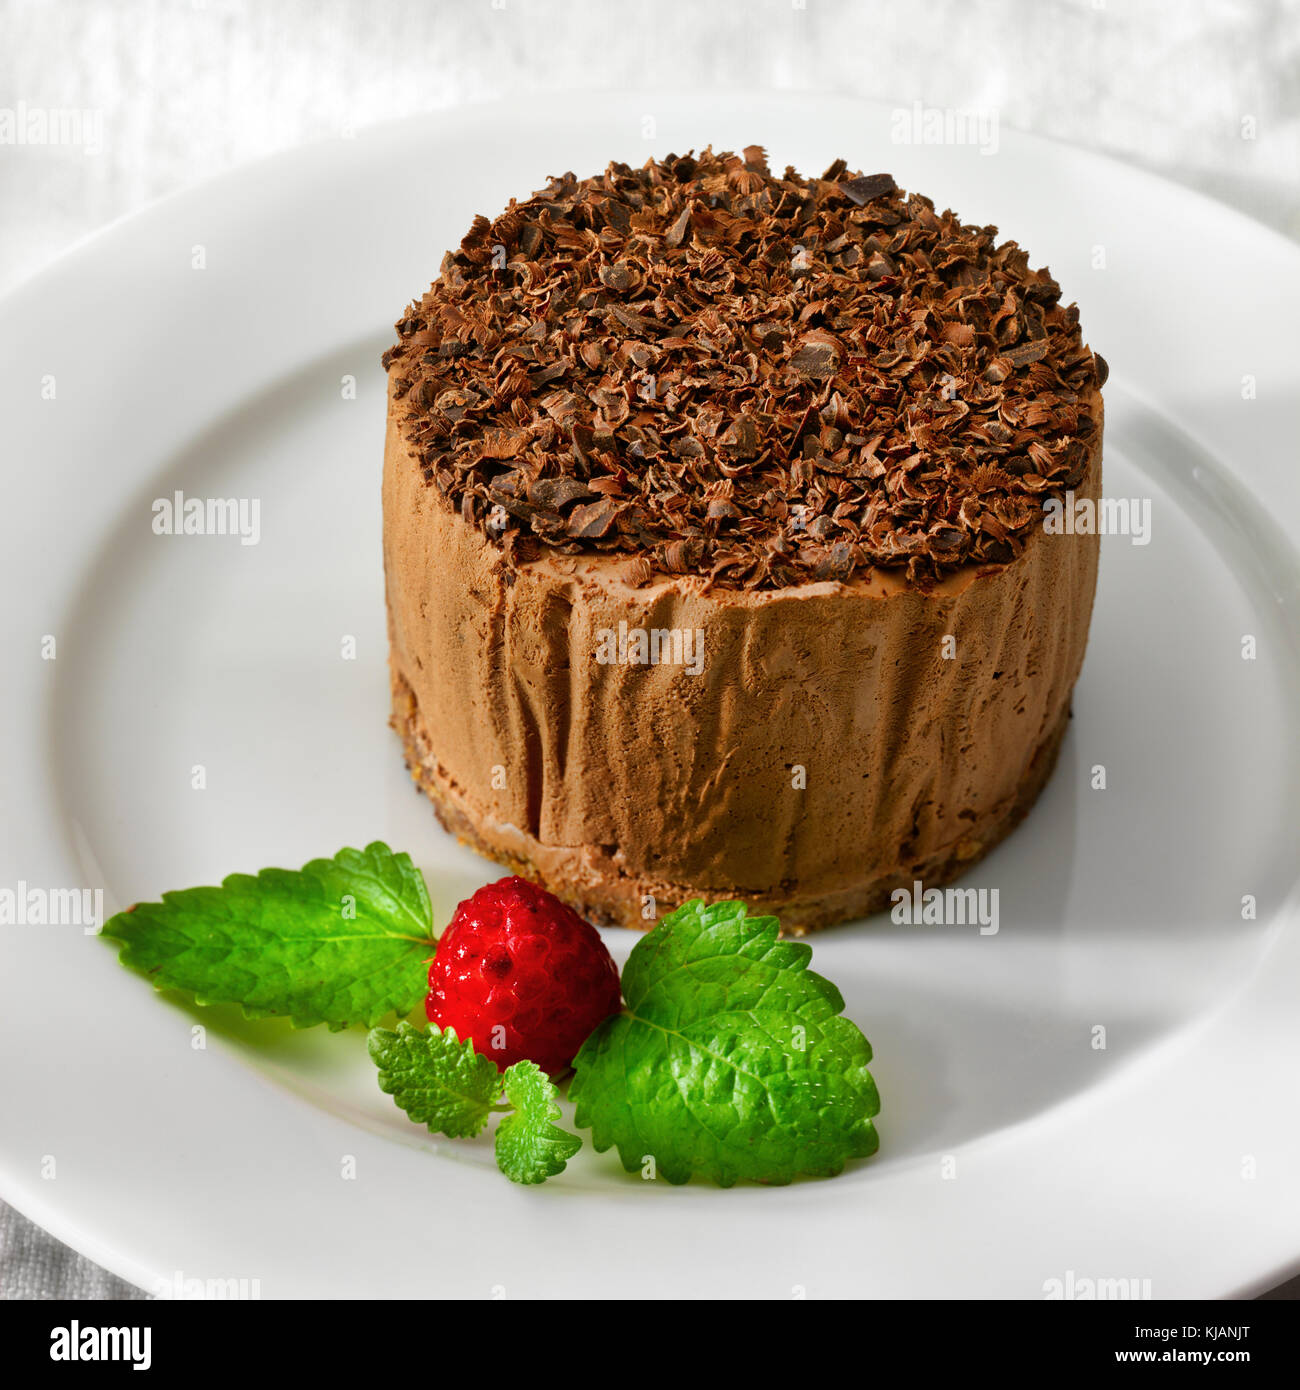 A delicious and tasty Chocolate cake Stock Photo